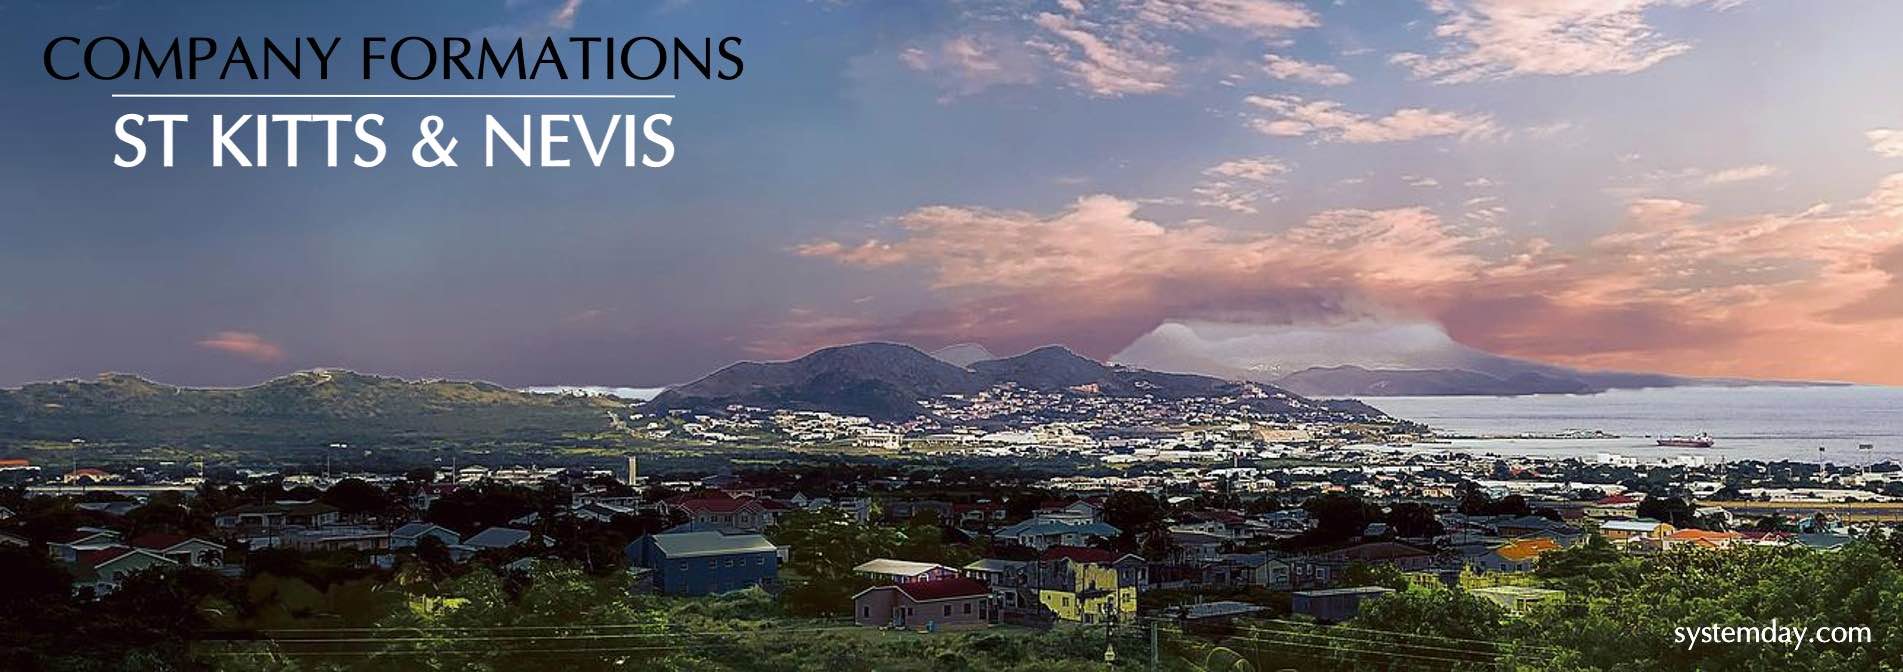 St Kitts and Nevis Company Formations